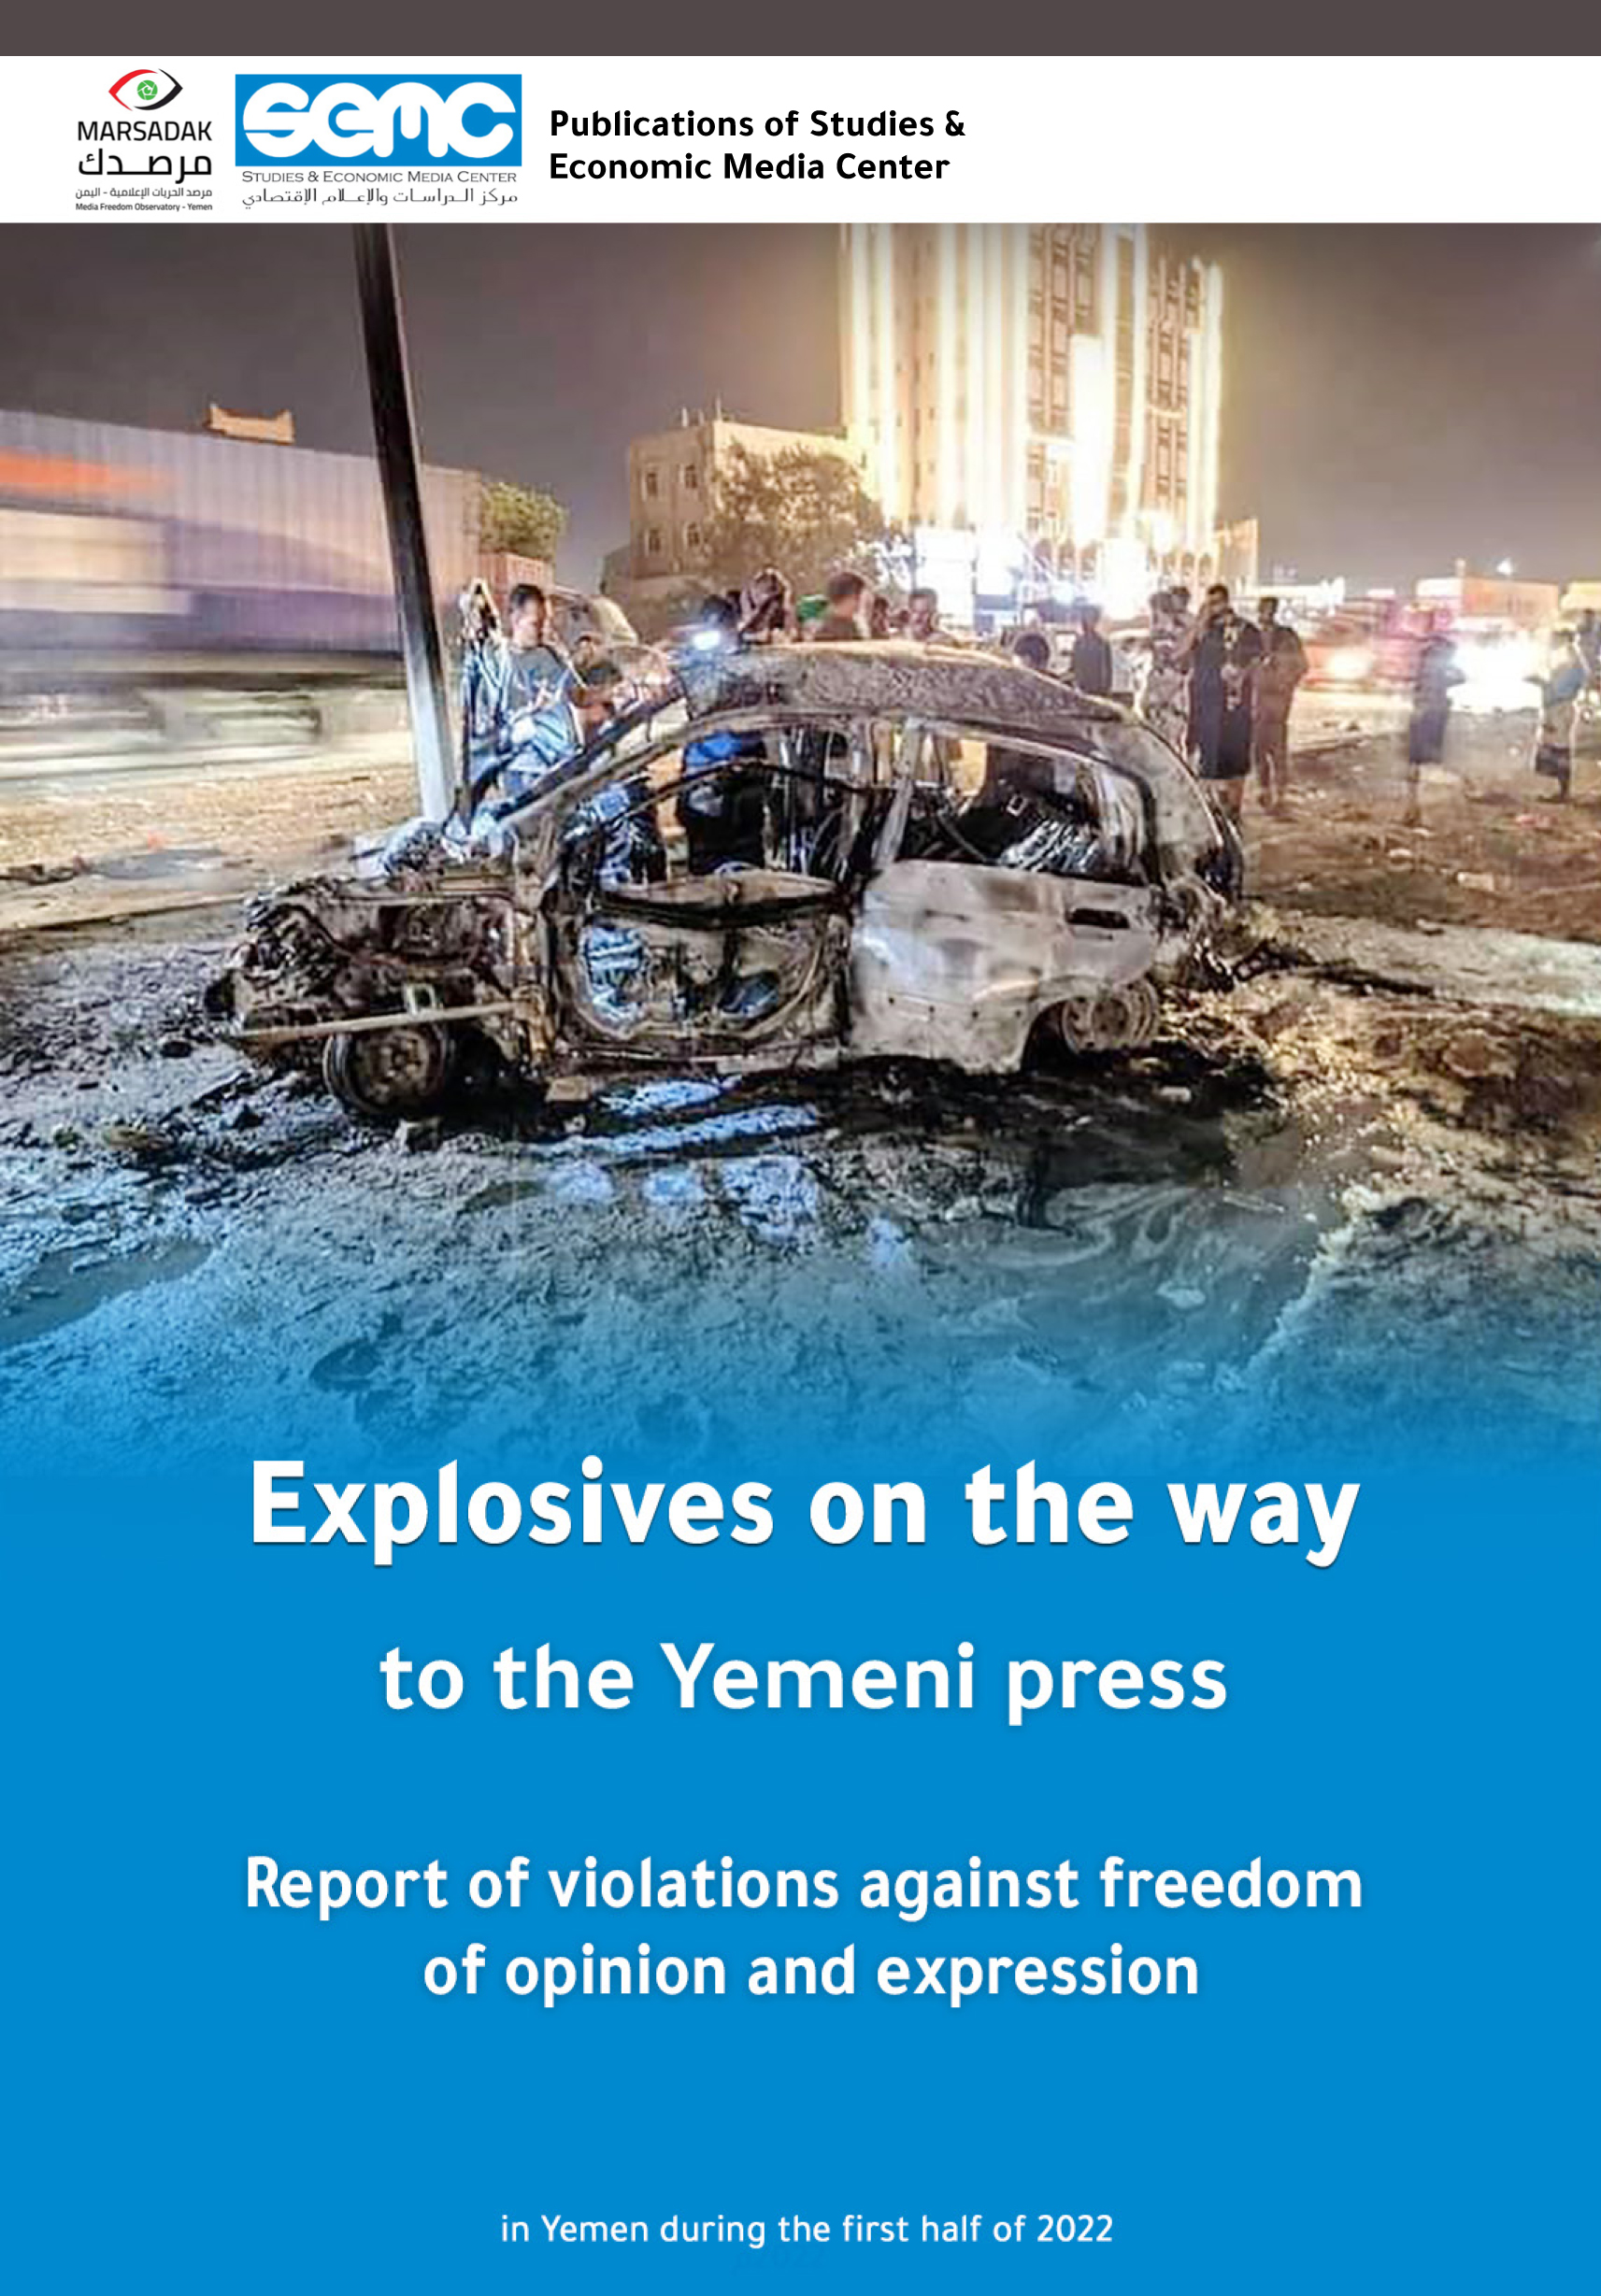 56 violations against freedom of expression in Yemen during the first half of 2022